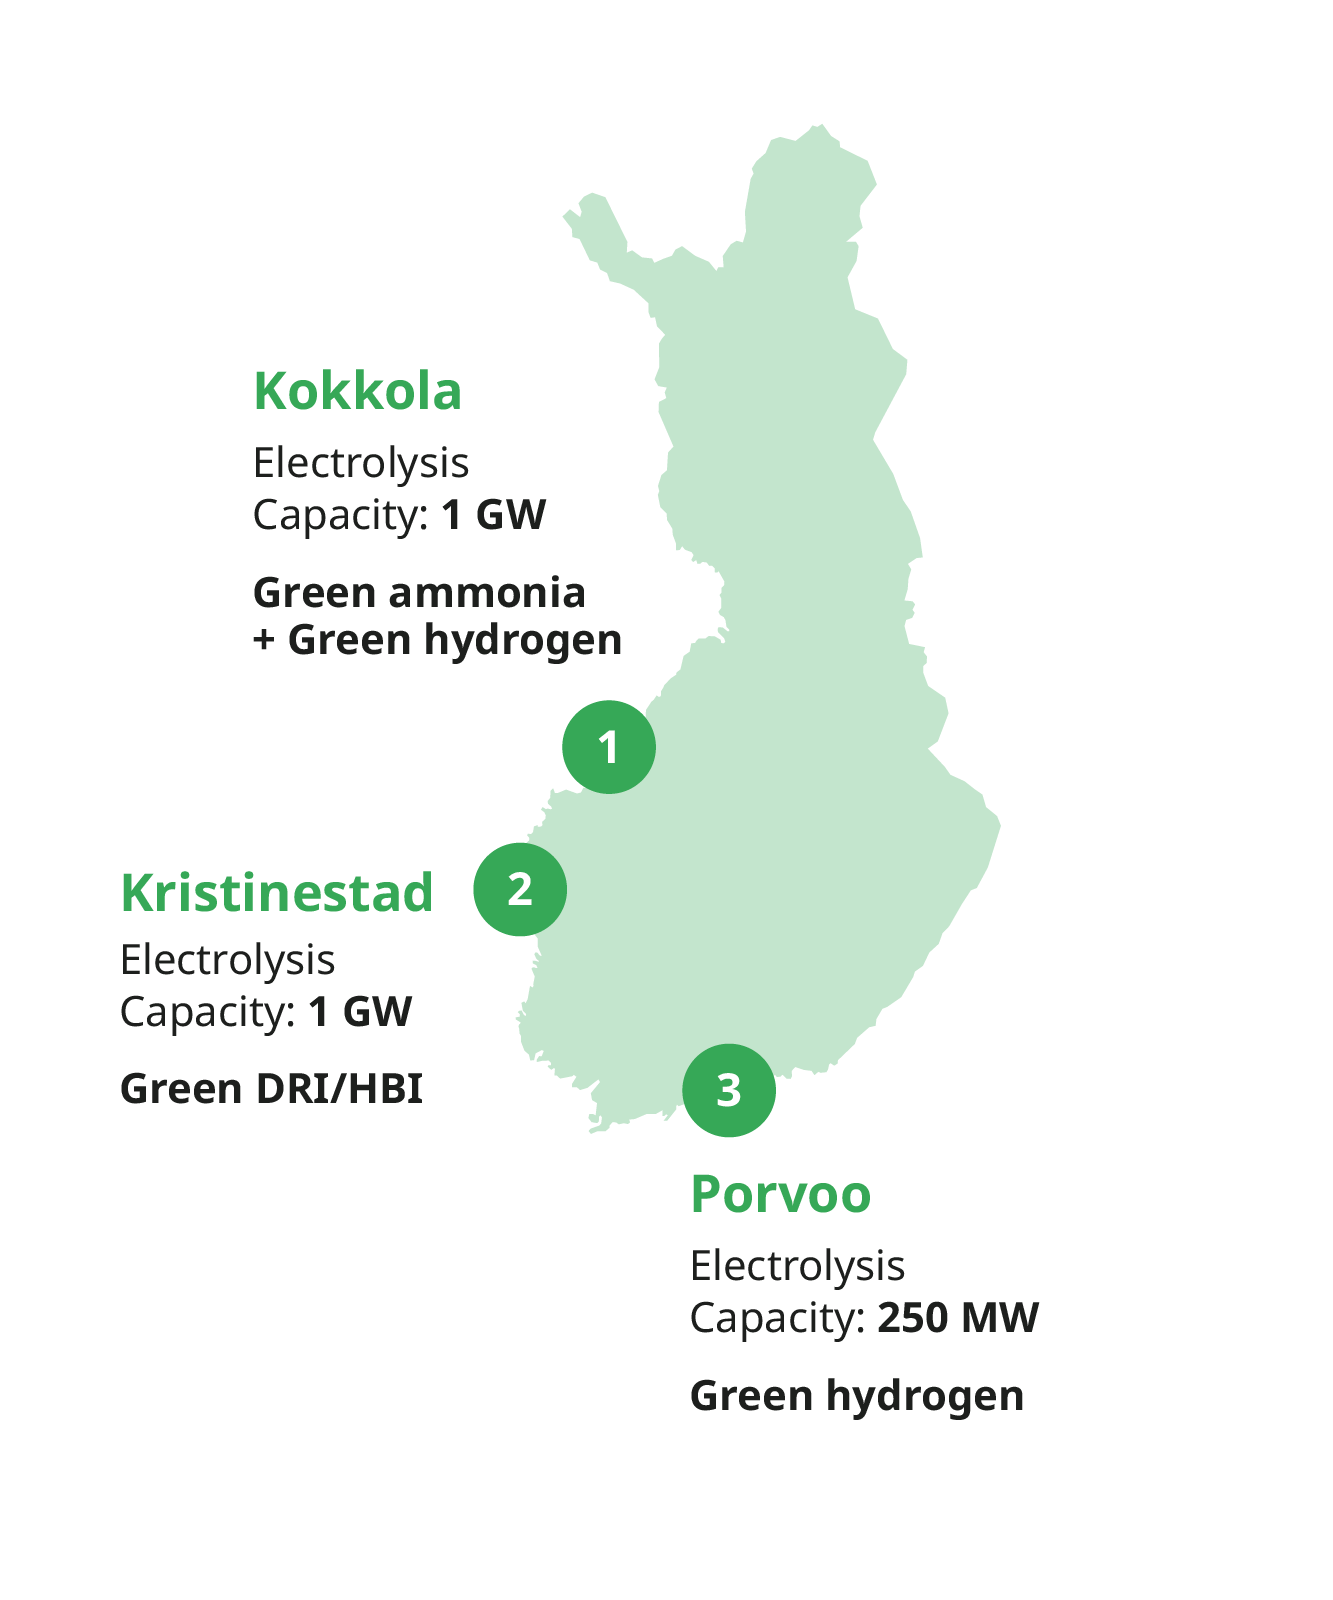 Map of Finland, showing the locations of Plug Power's planned investment.